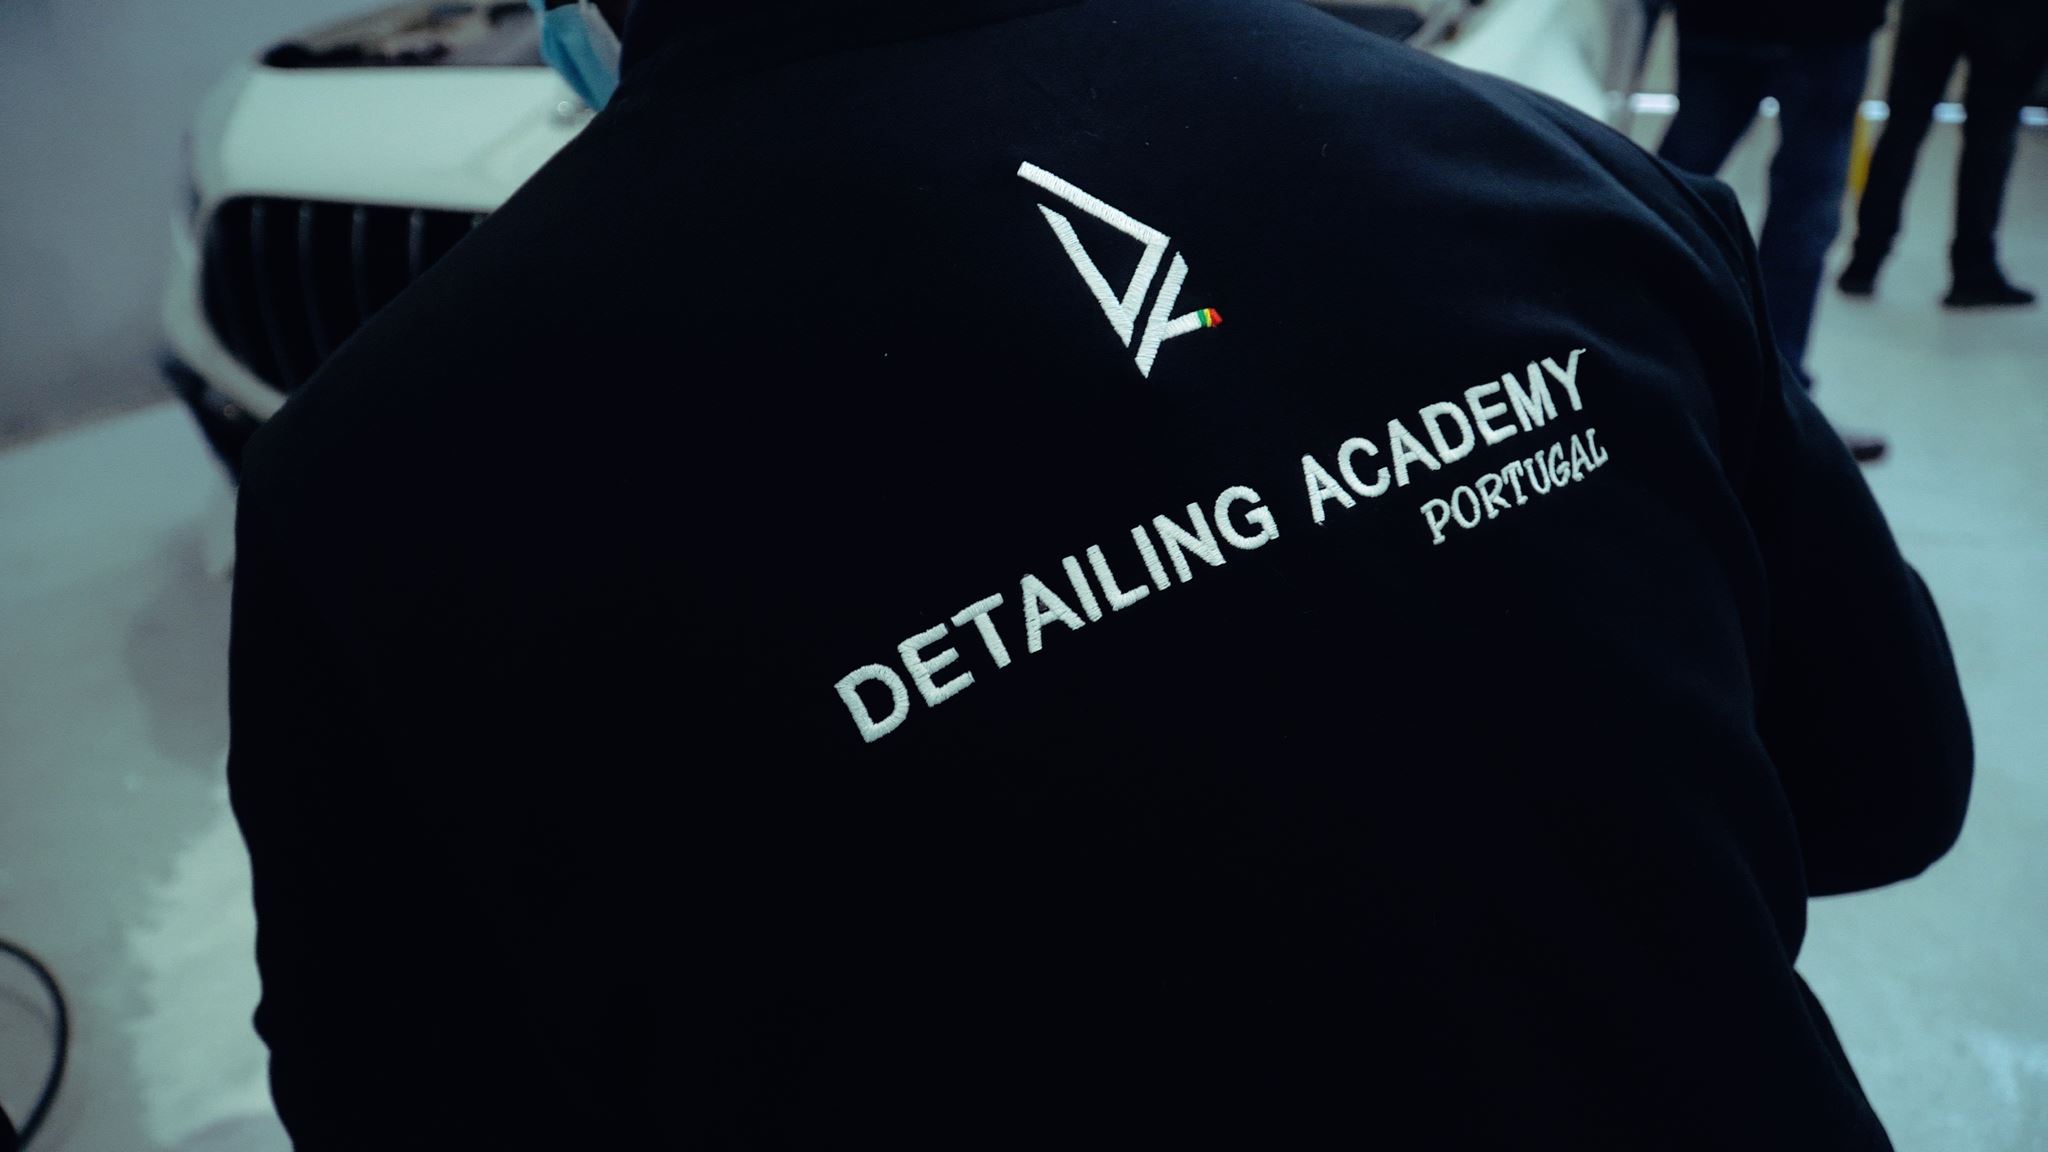 Detailing Academy Portugal 3